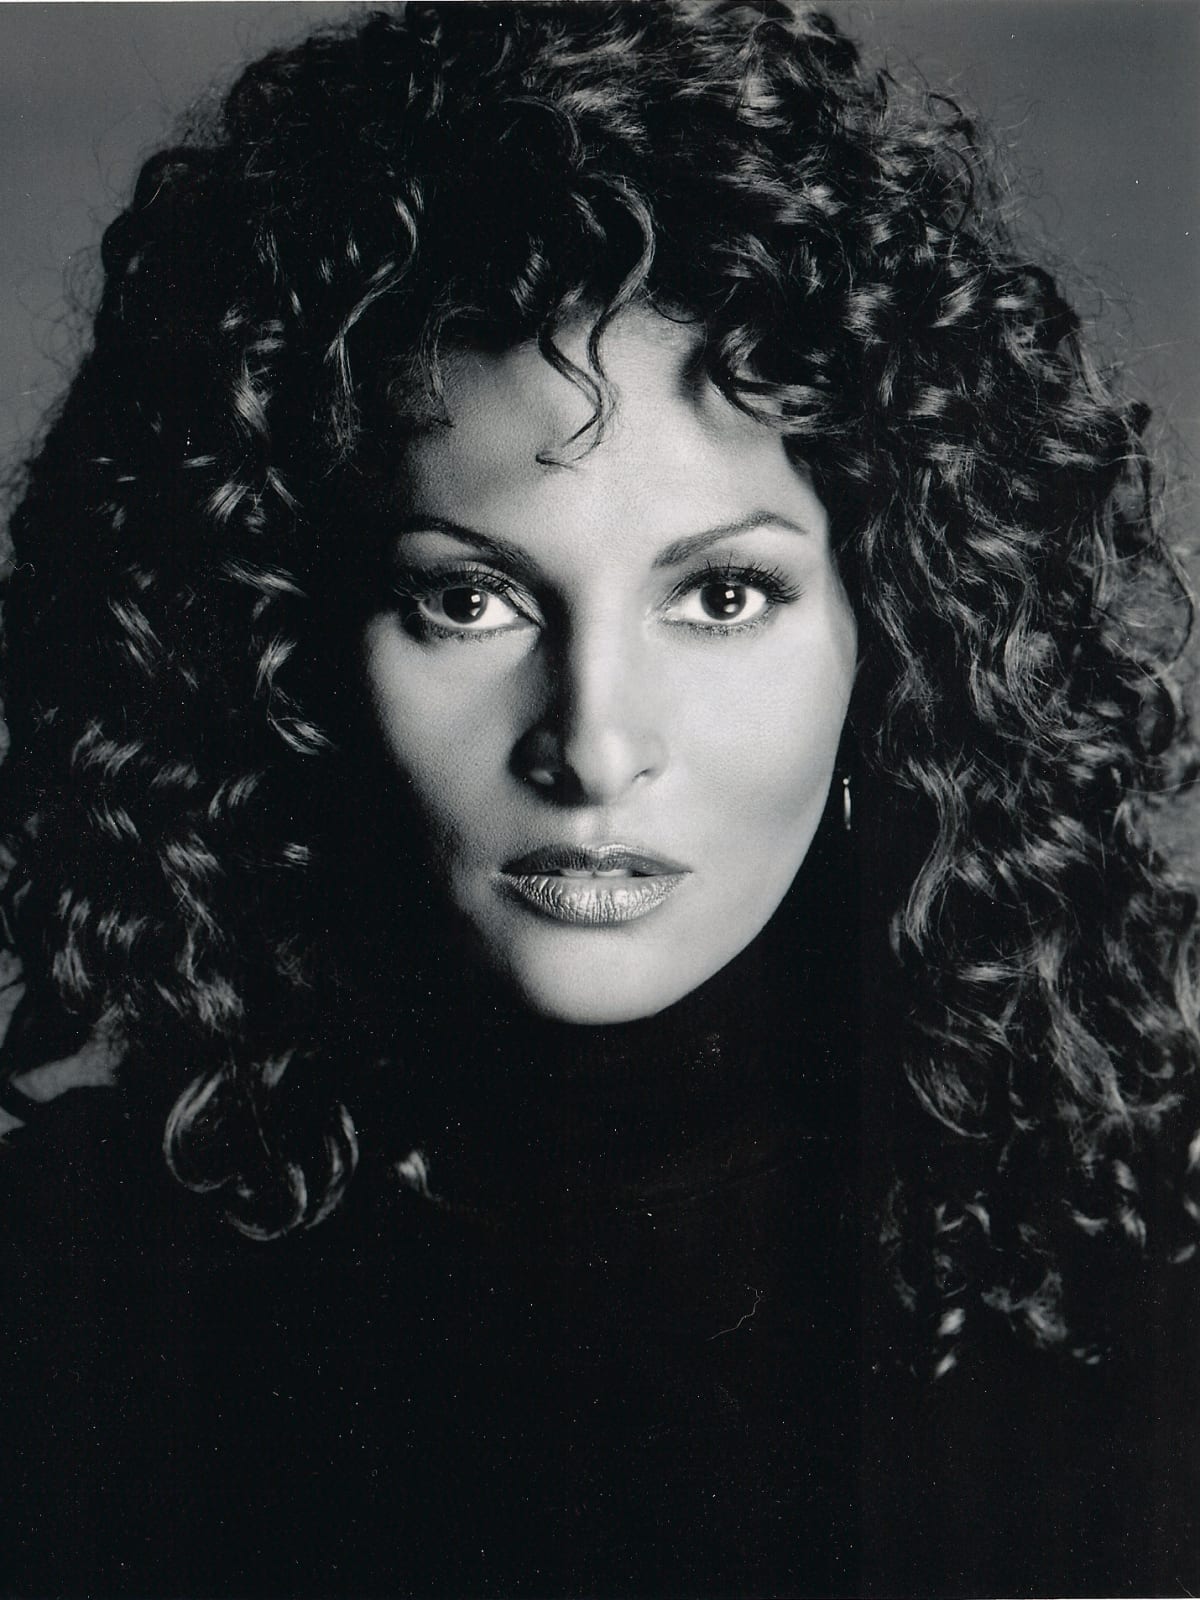 Behind The Scenes Of Pam Grier: The Untold Story Of The Actress Who Changed The Game